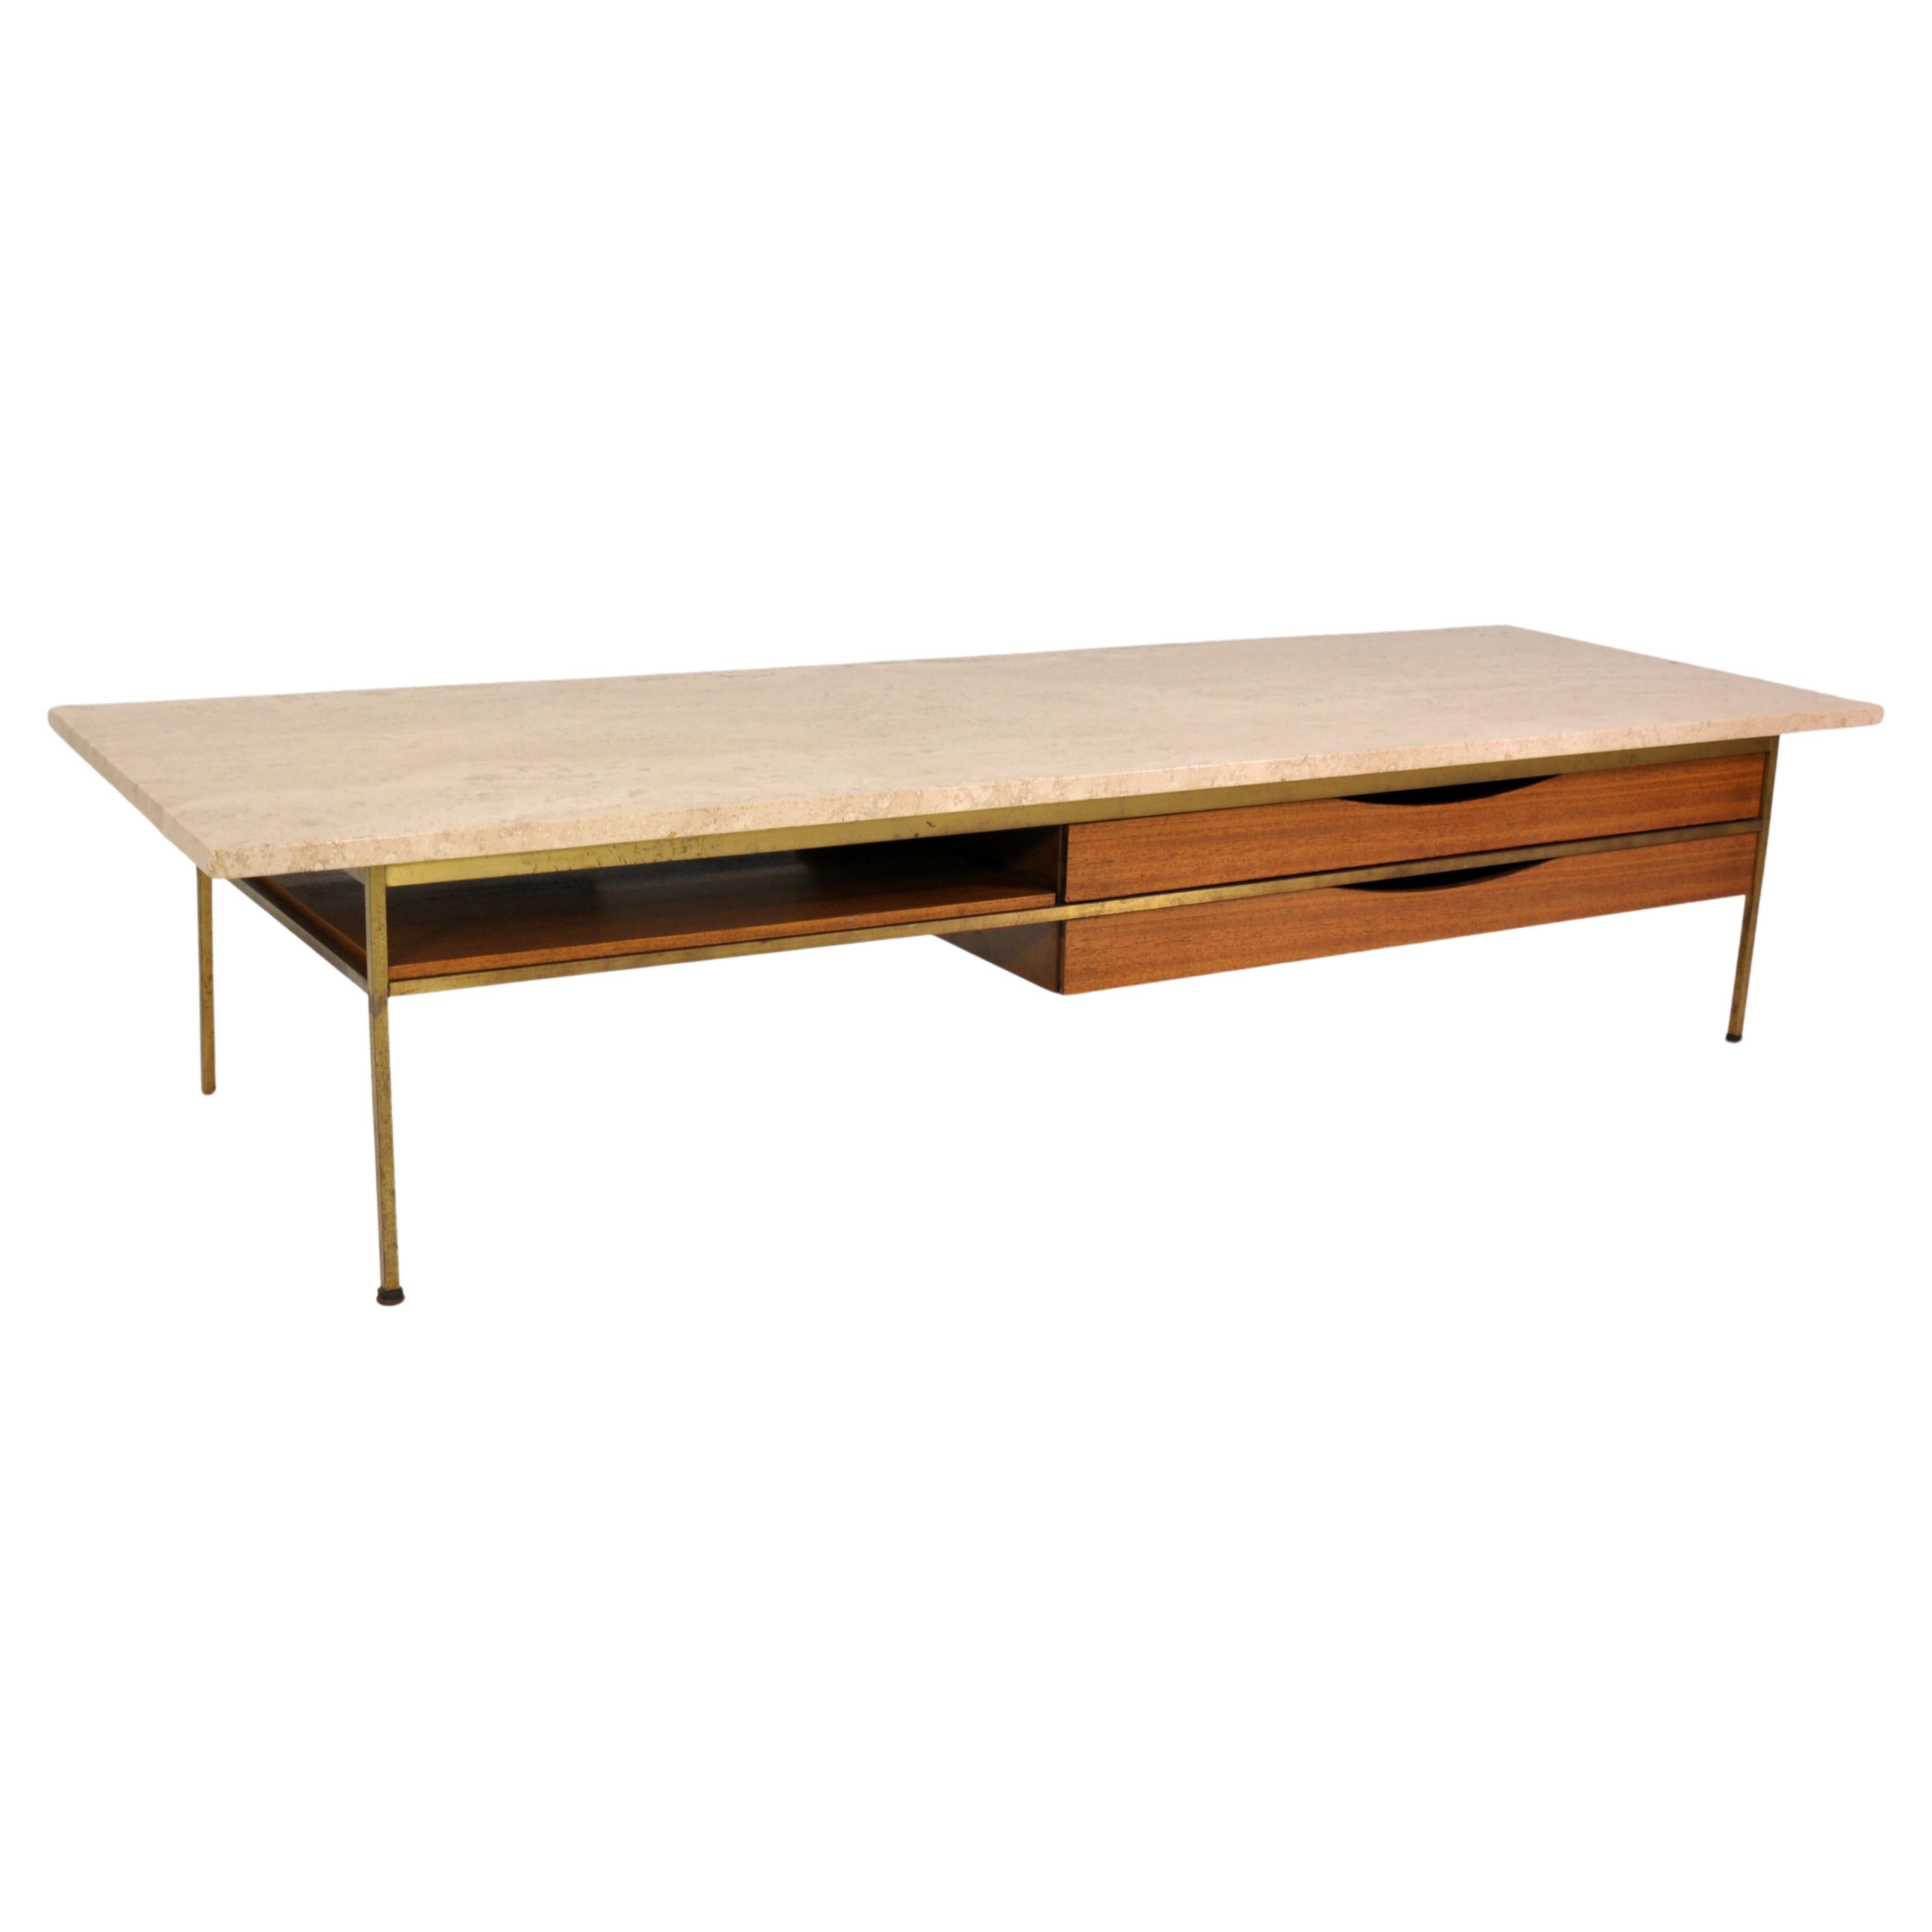 American Paul McCobb Irwin Collection Brass and Travertine Coffee Table by Calvin